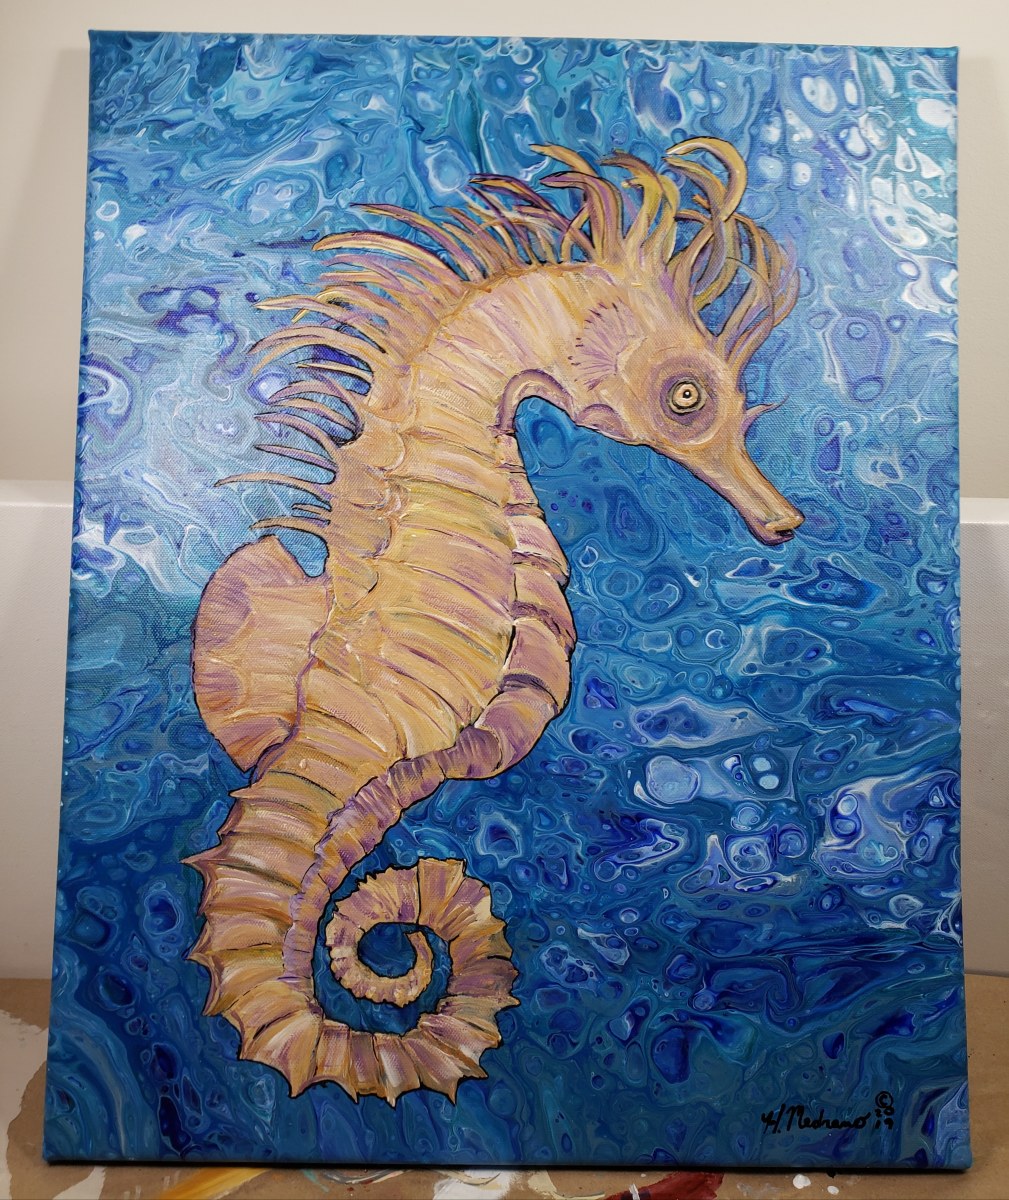 Seahorse Pour 2/25 by Heather Medrano